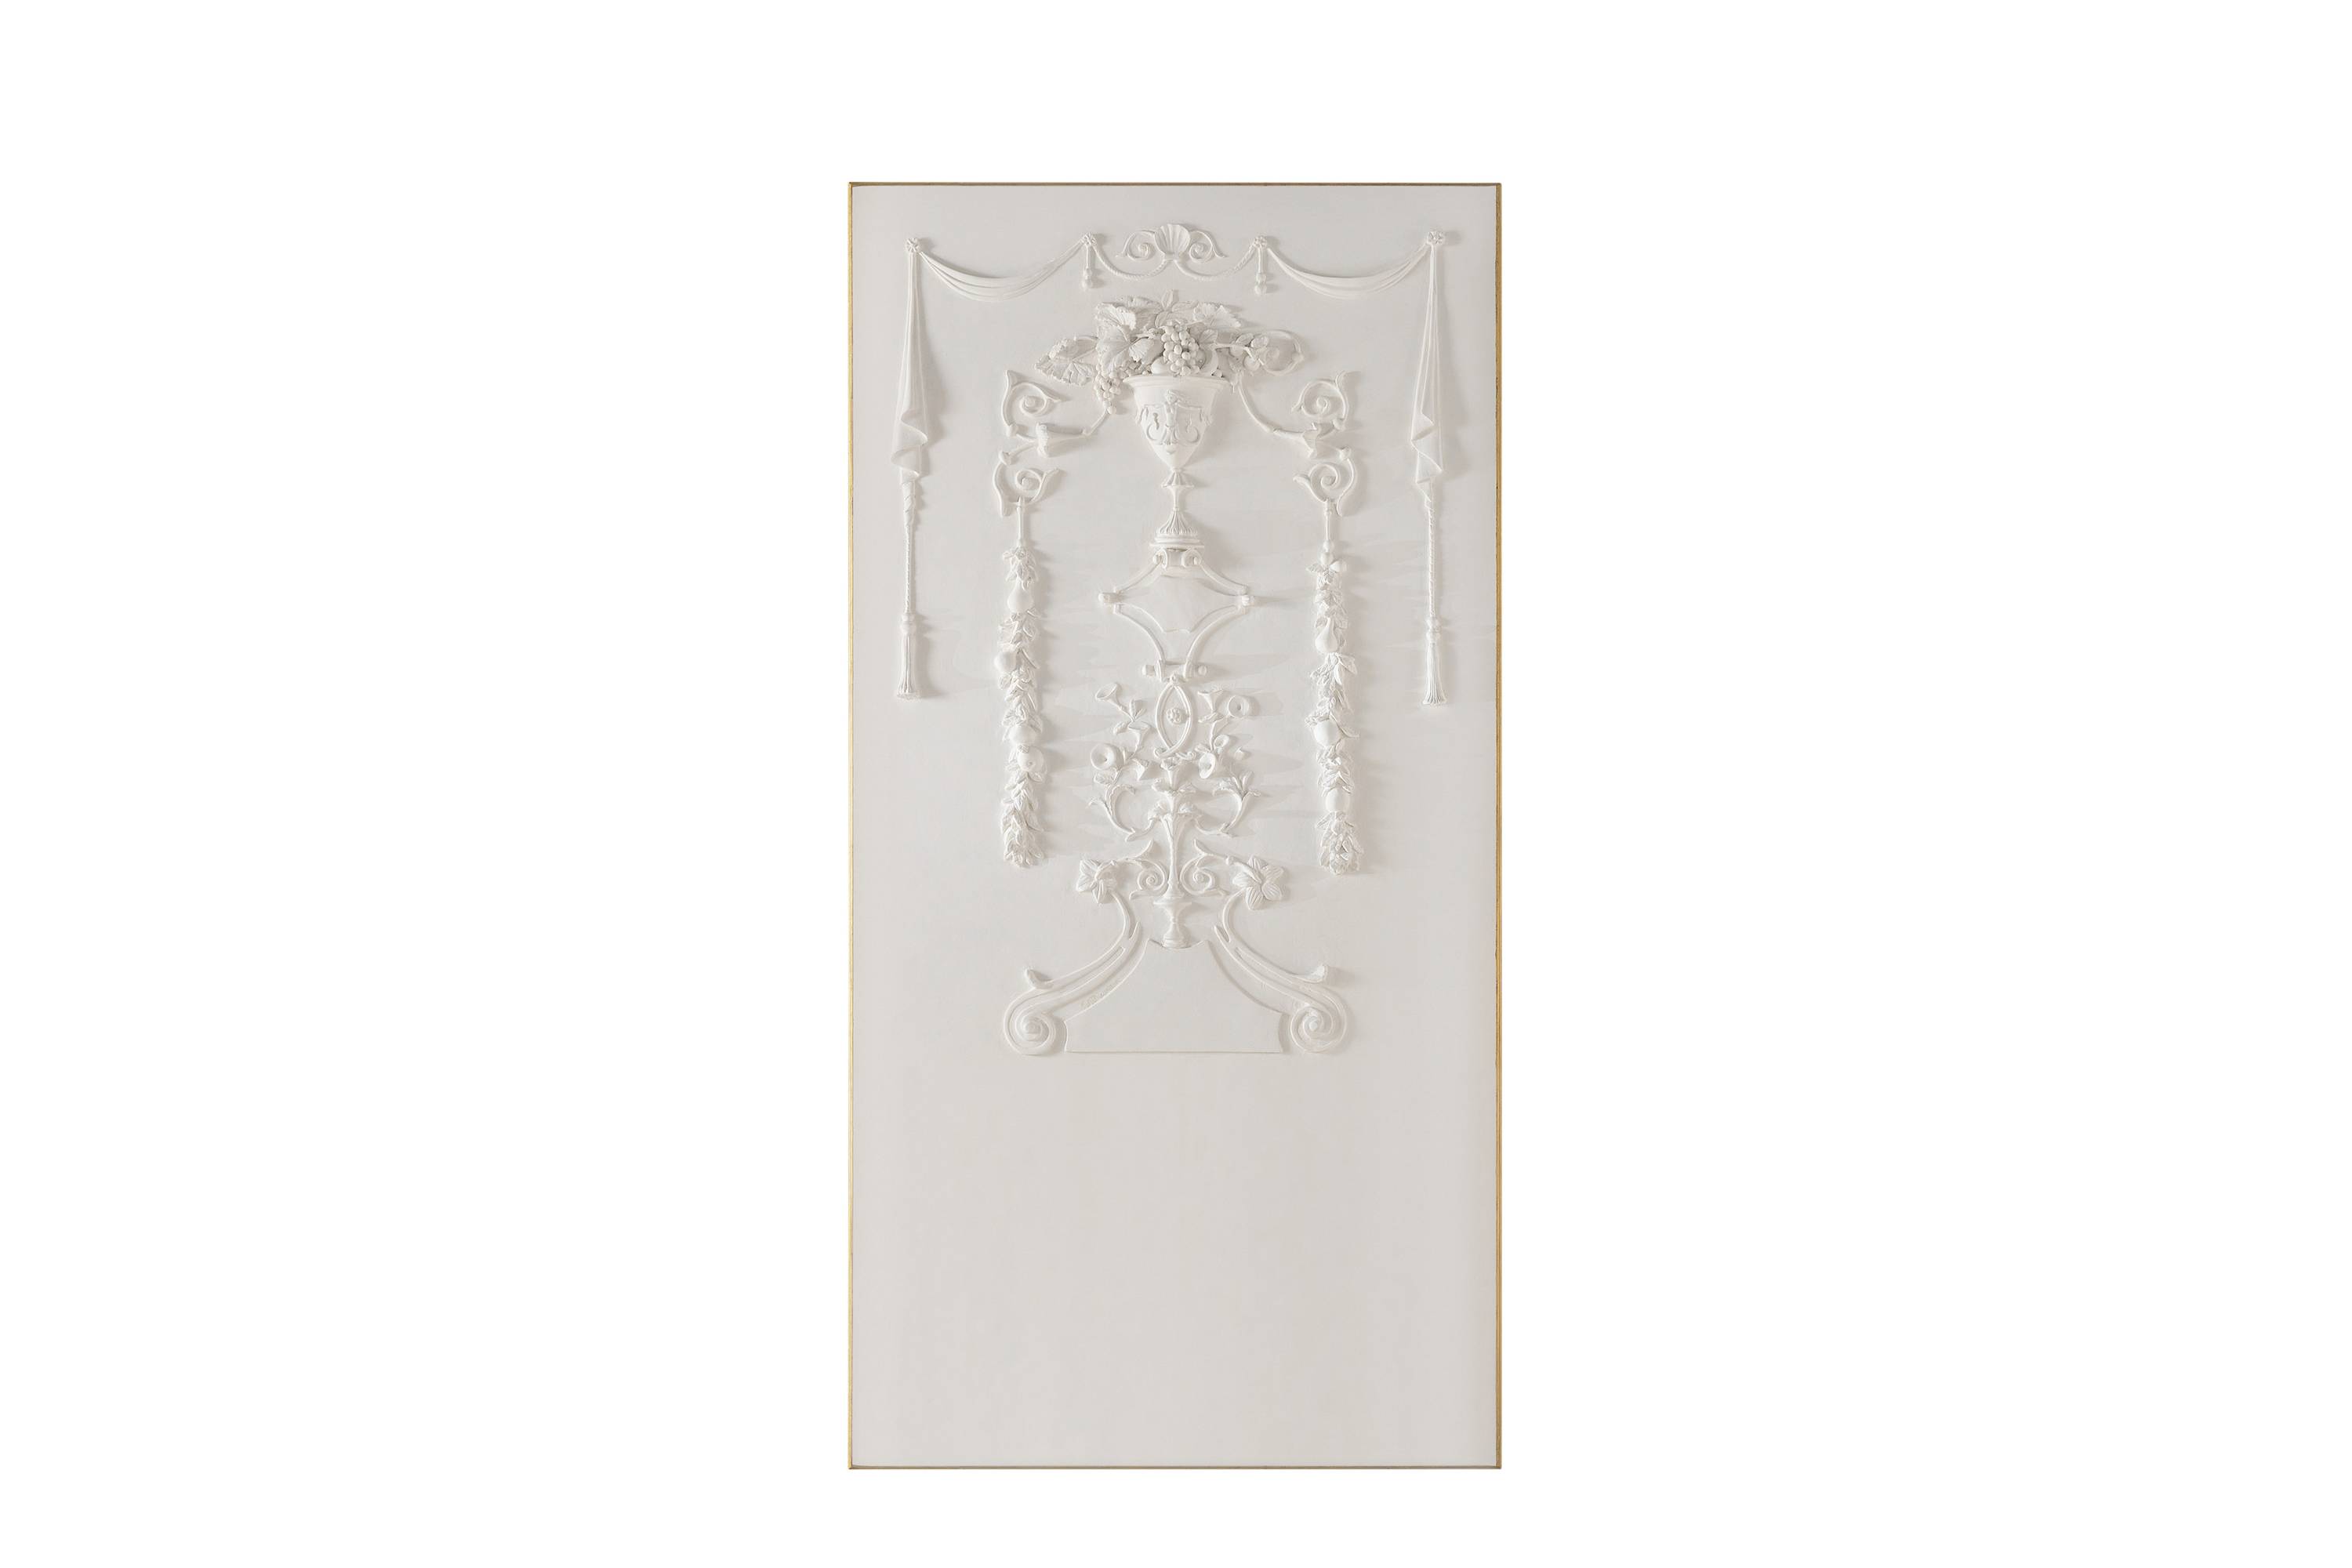 HUDSON decorative panel - A luxury experience with the Savoir-Faire collection and its classic luxurious furniture